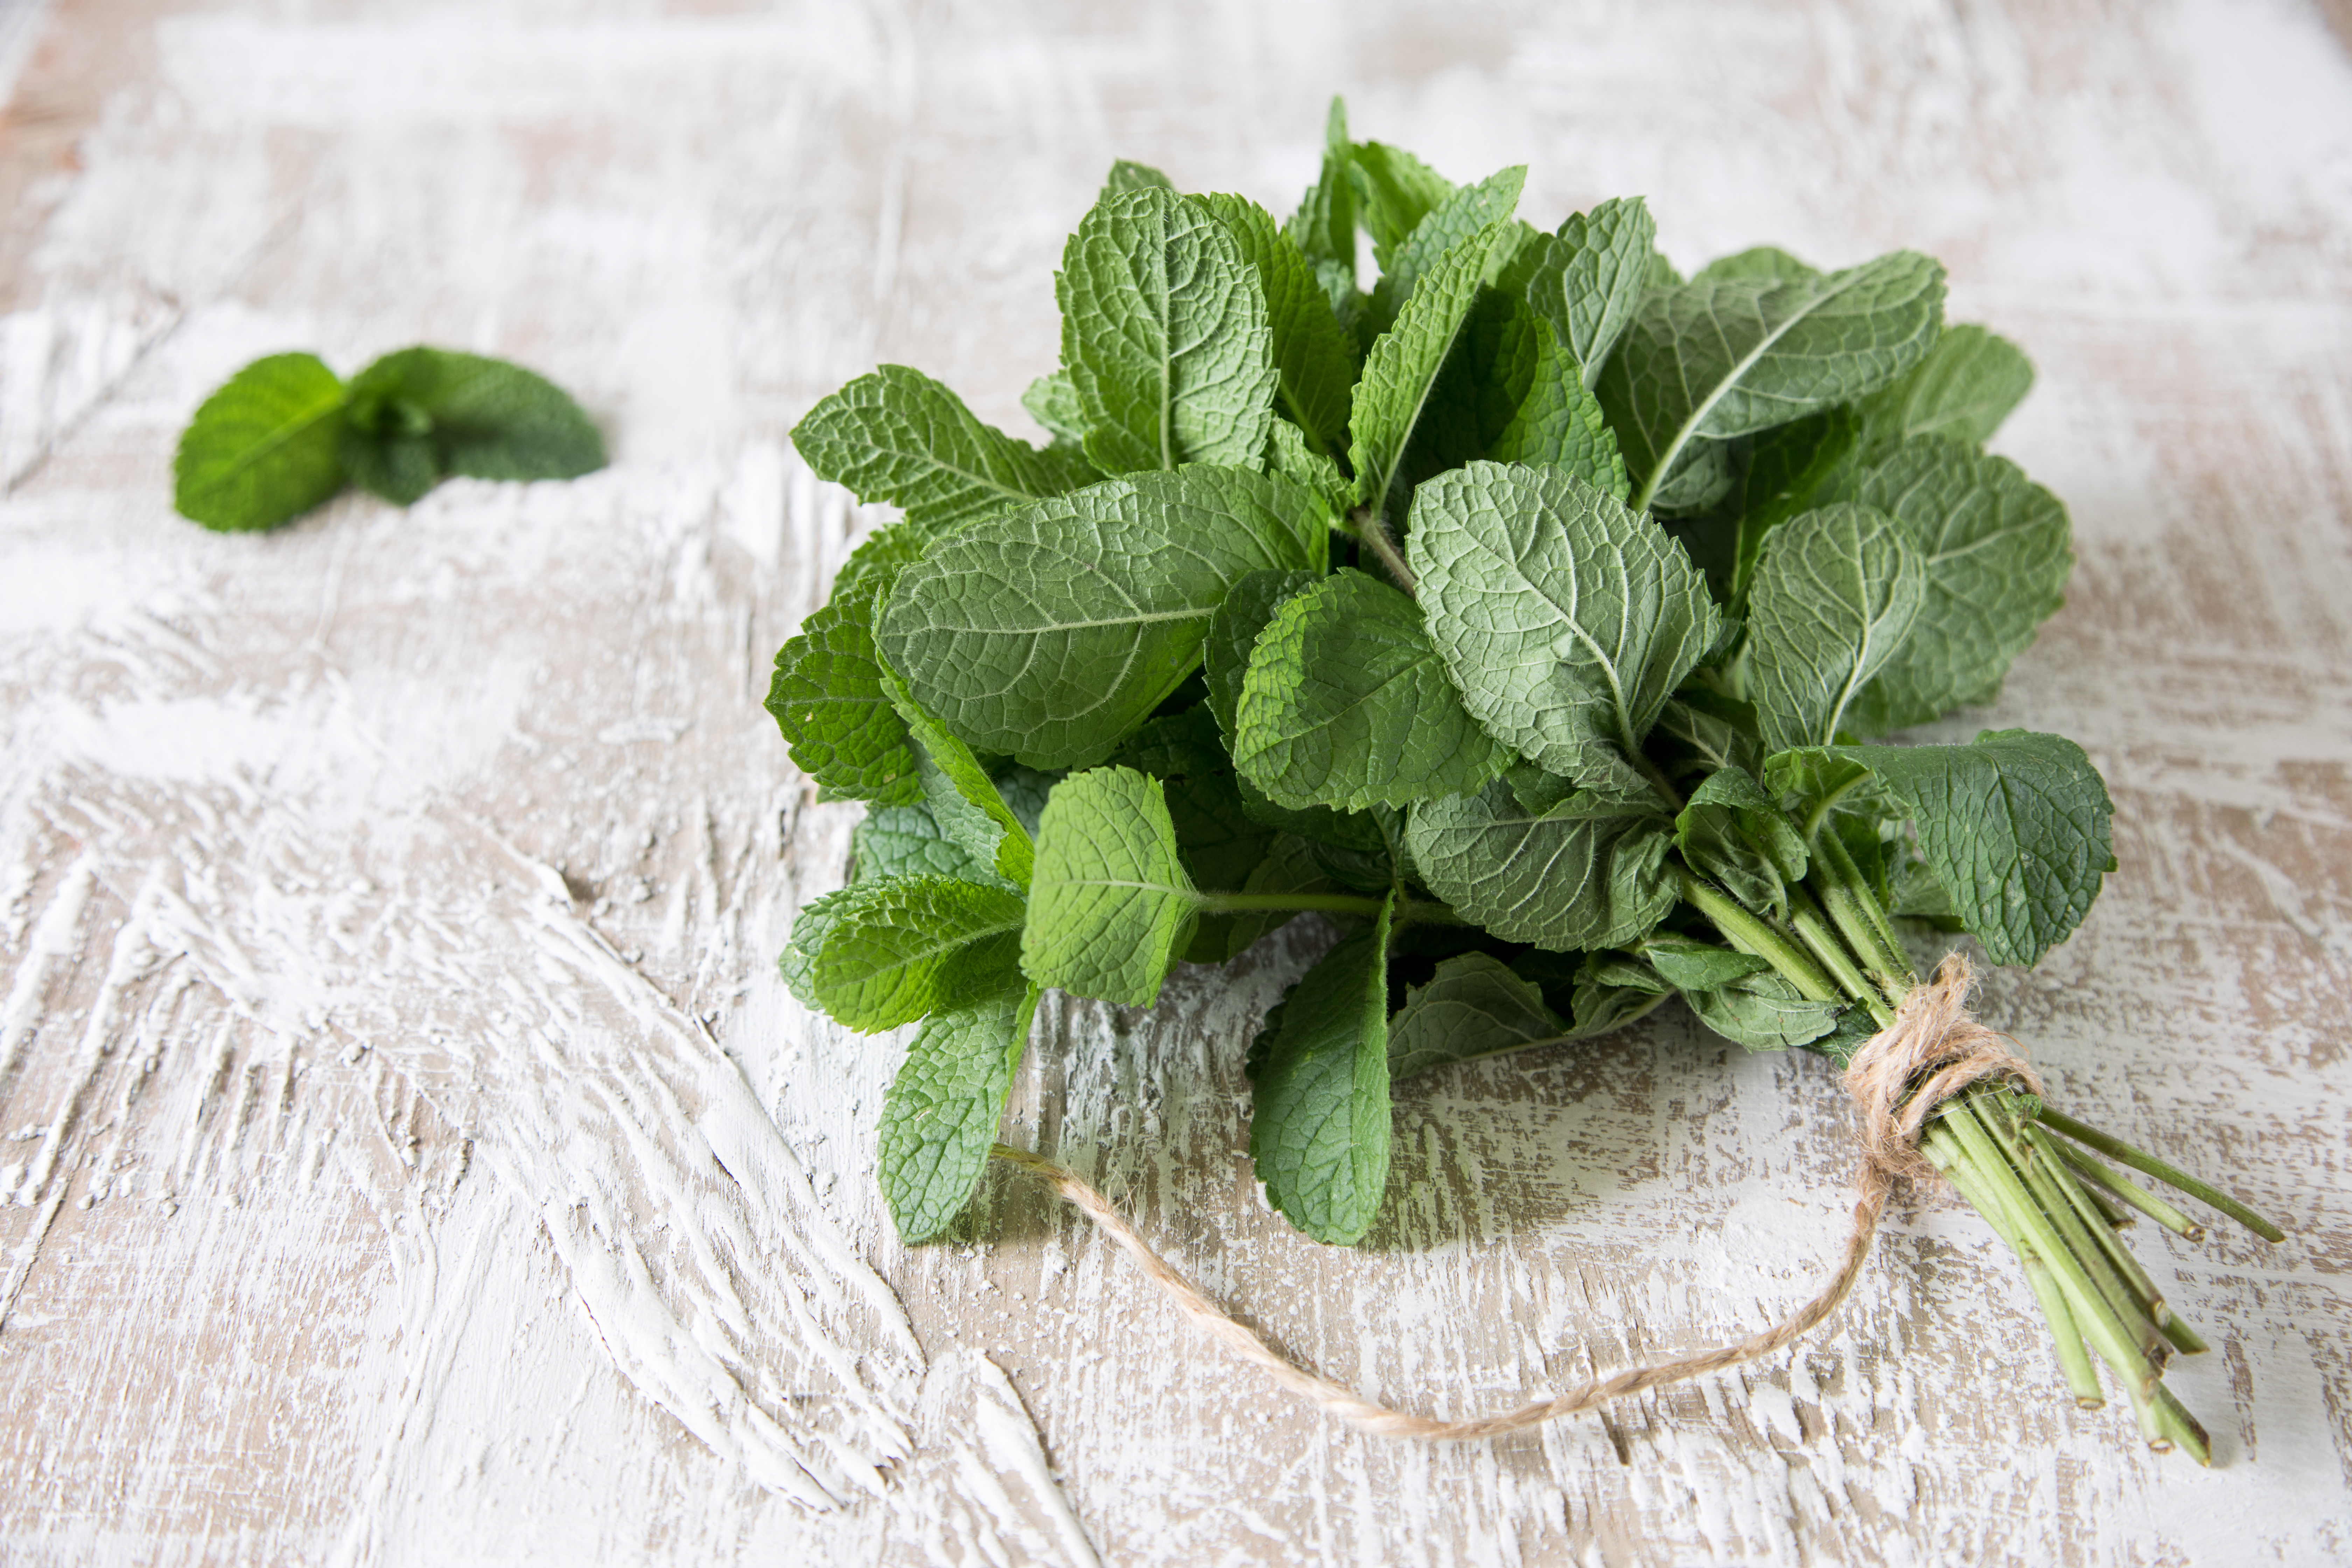 What Are the Benefits of Eating Whole Mint Leaves? | LIVESTRONG.COM